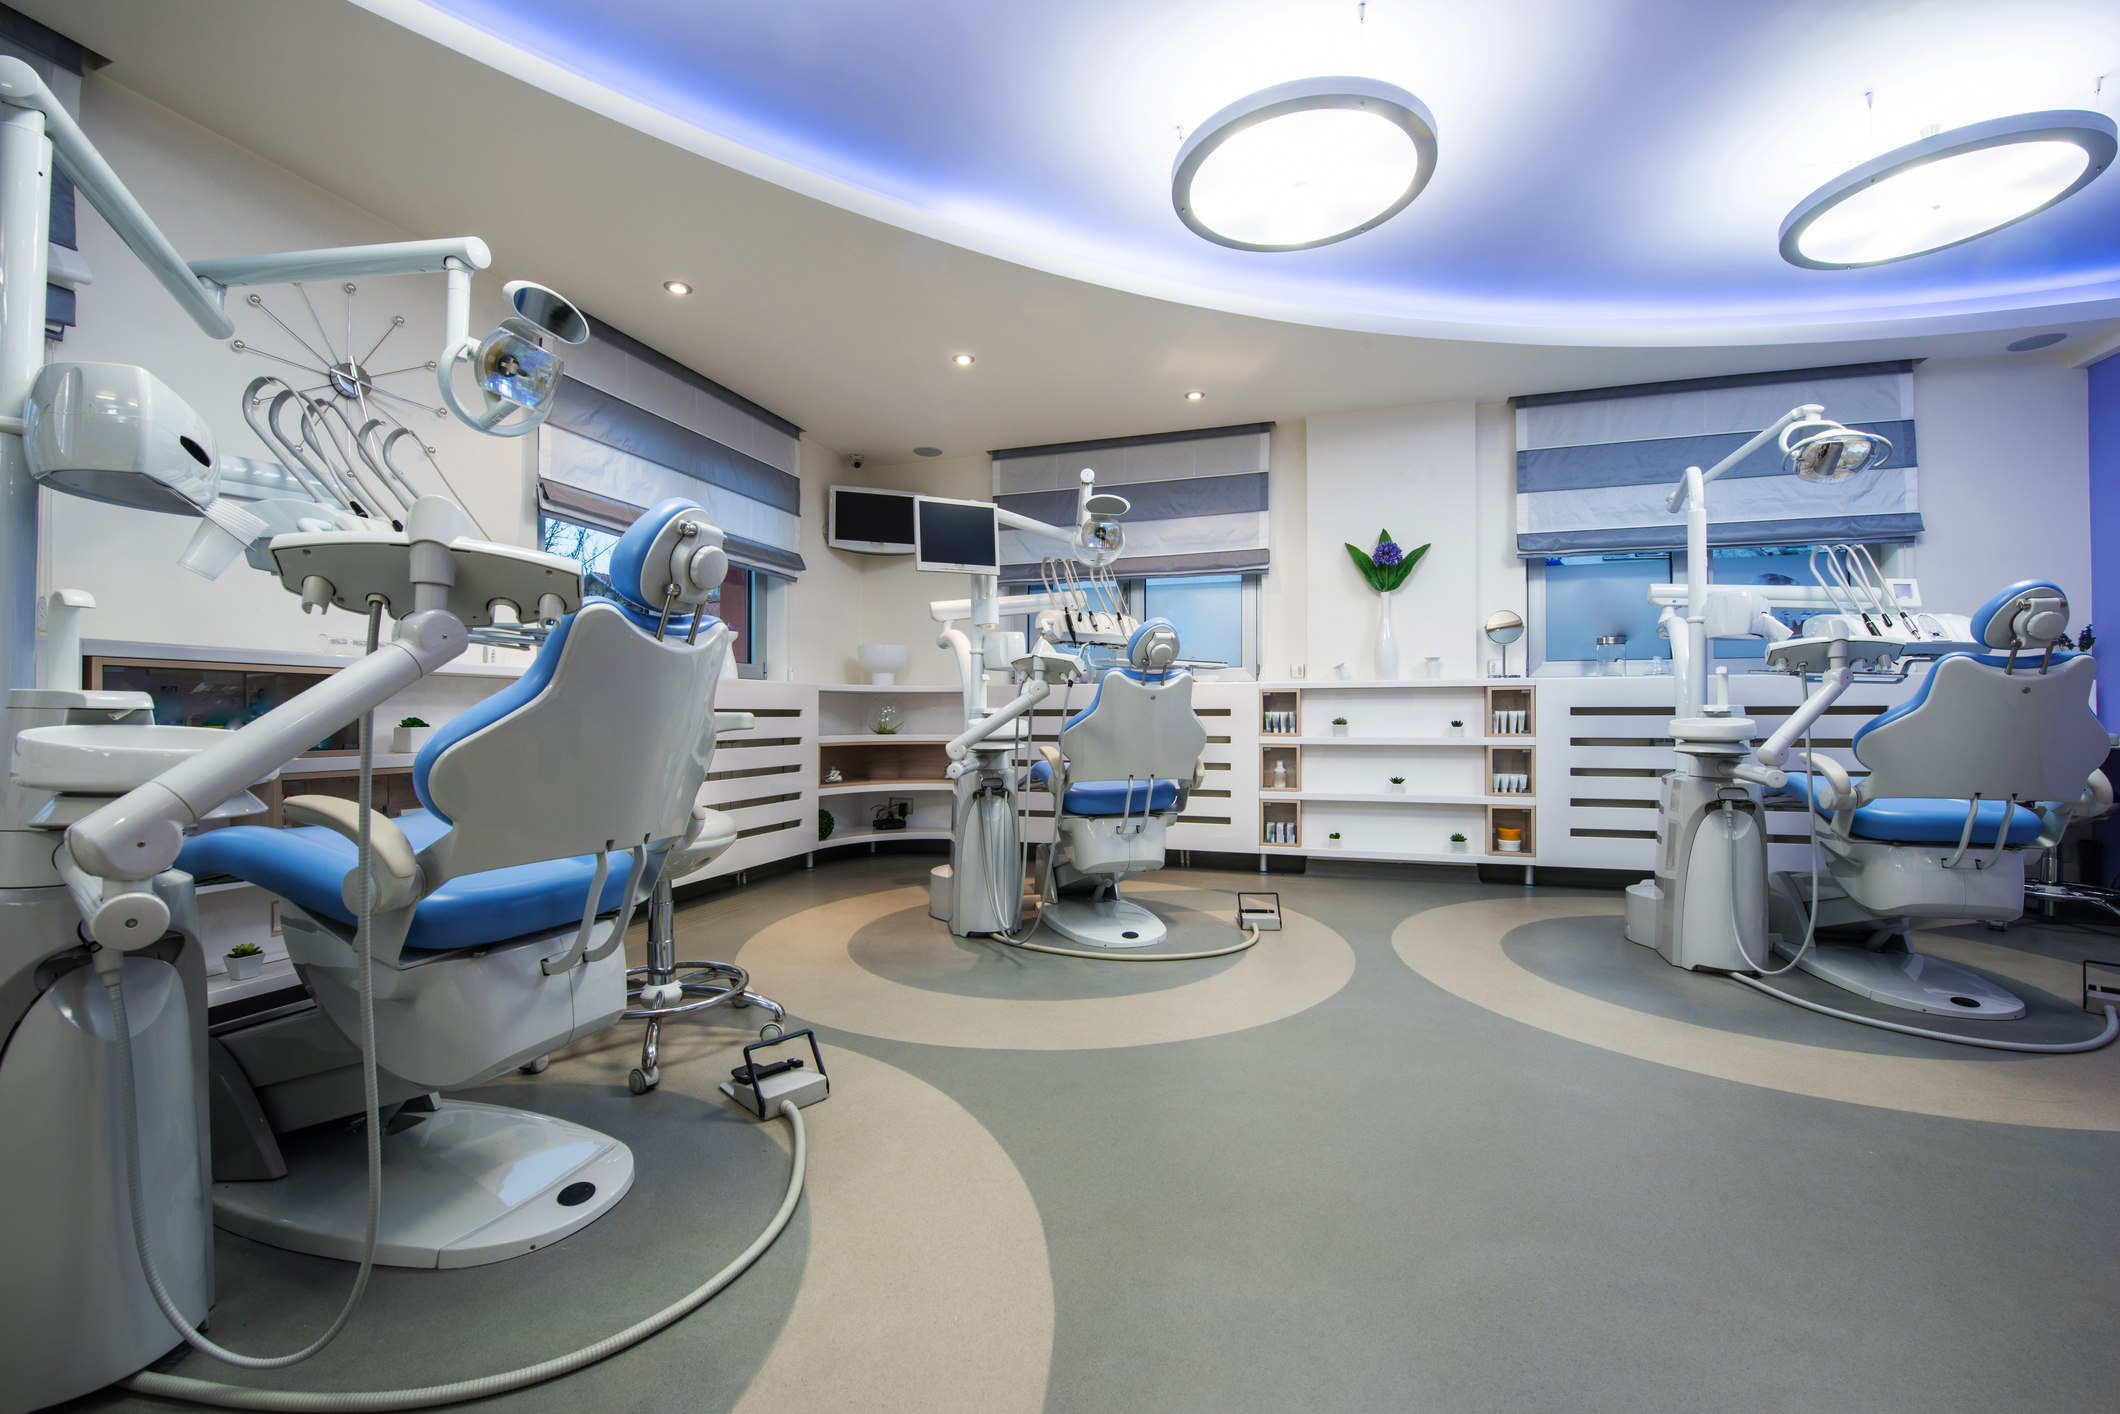 Dental clinic interior design with several working boxes and tools